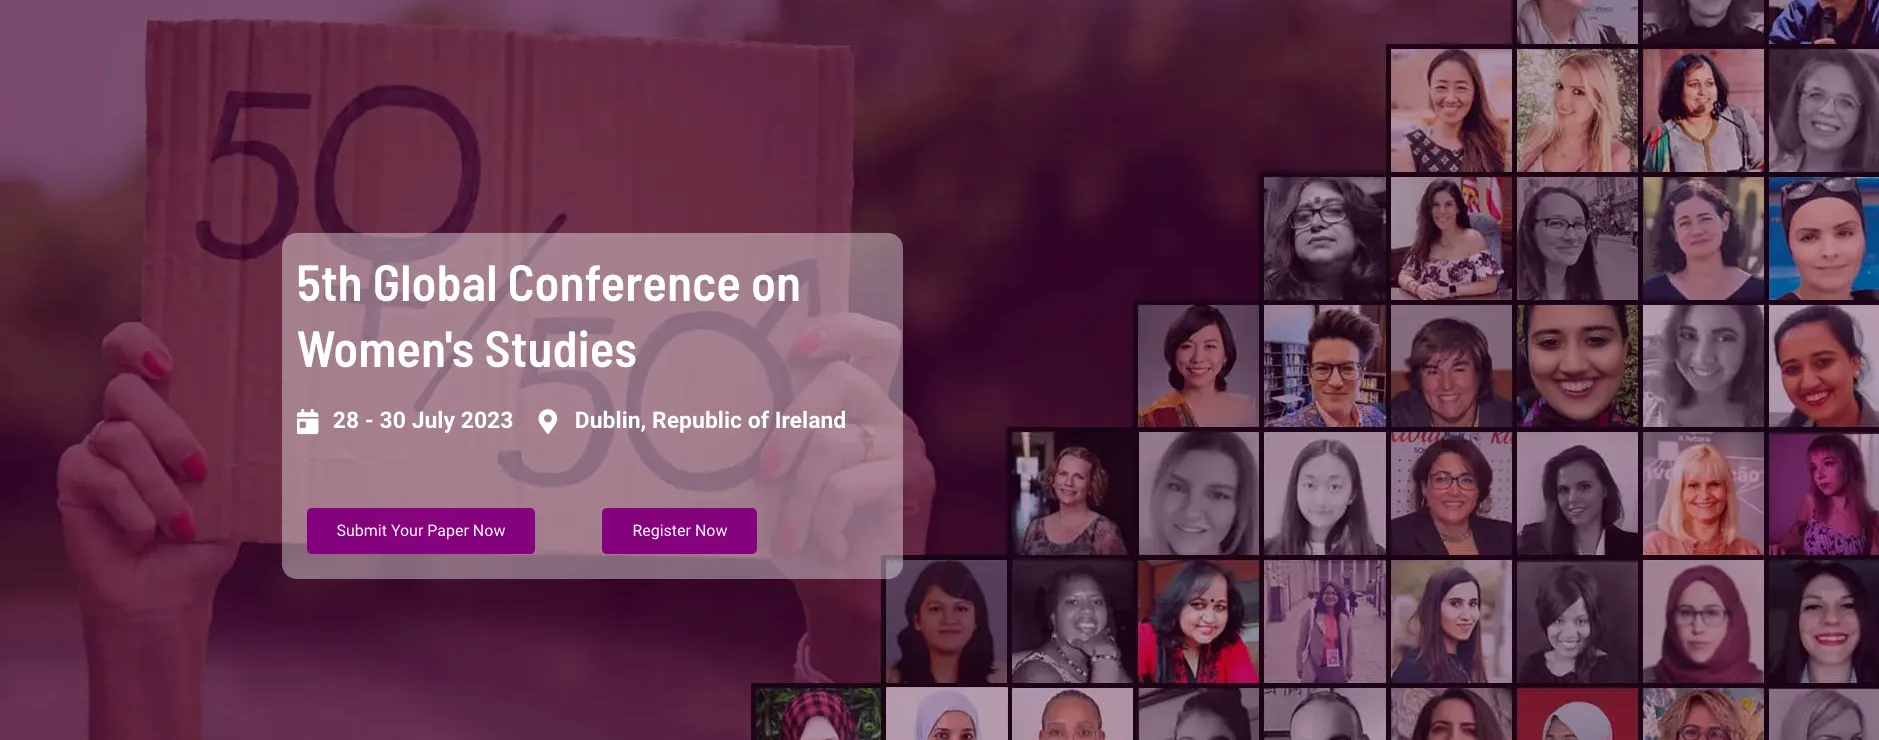 The 5th Global Conference on Women’s Studies